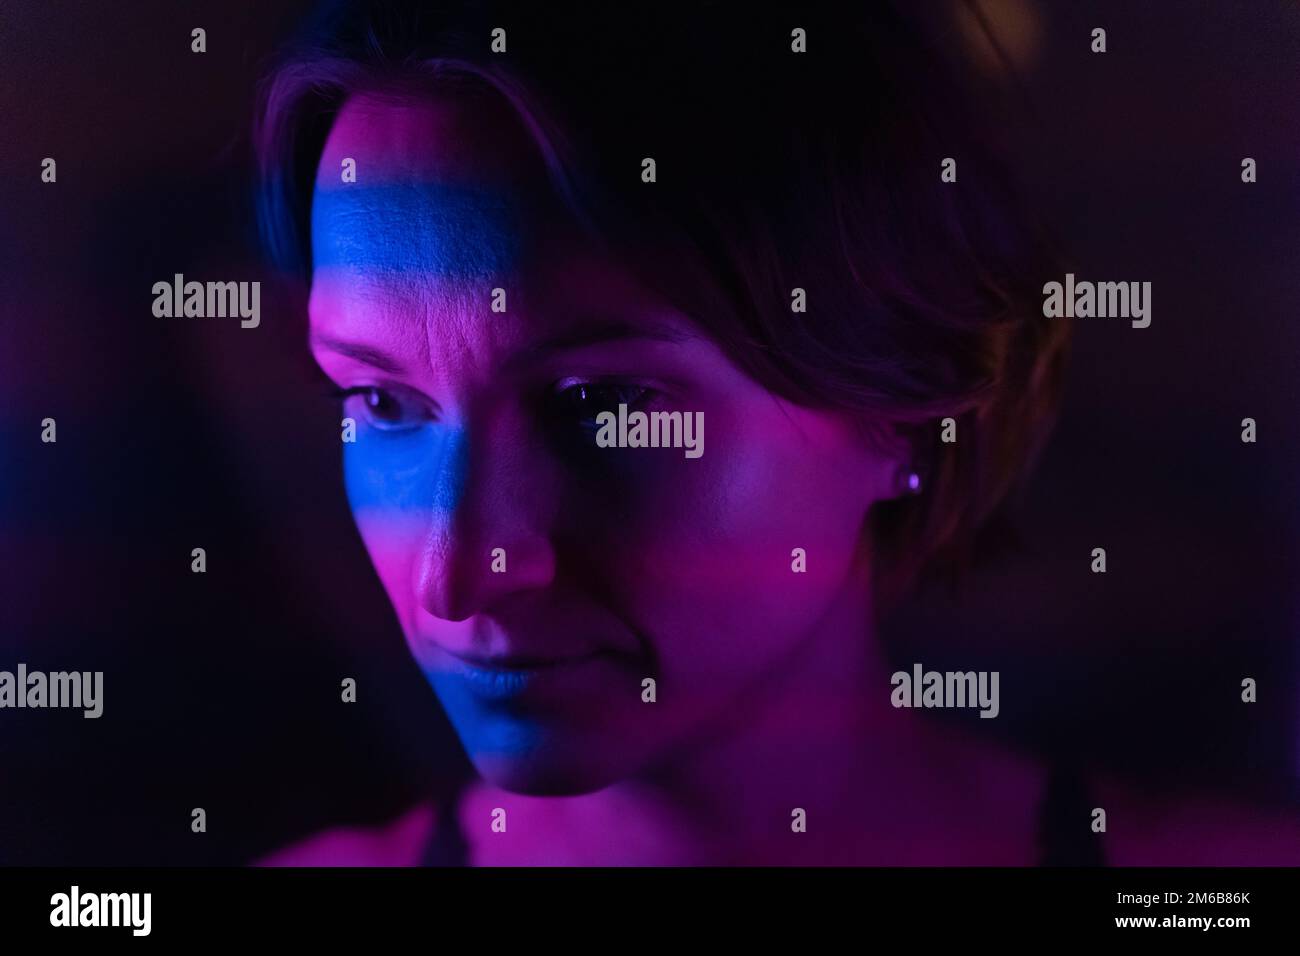 Stripes of blue and purple or purple neon light up the face of a young dark-haired woman. Stock Photo